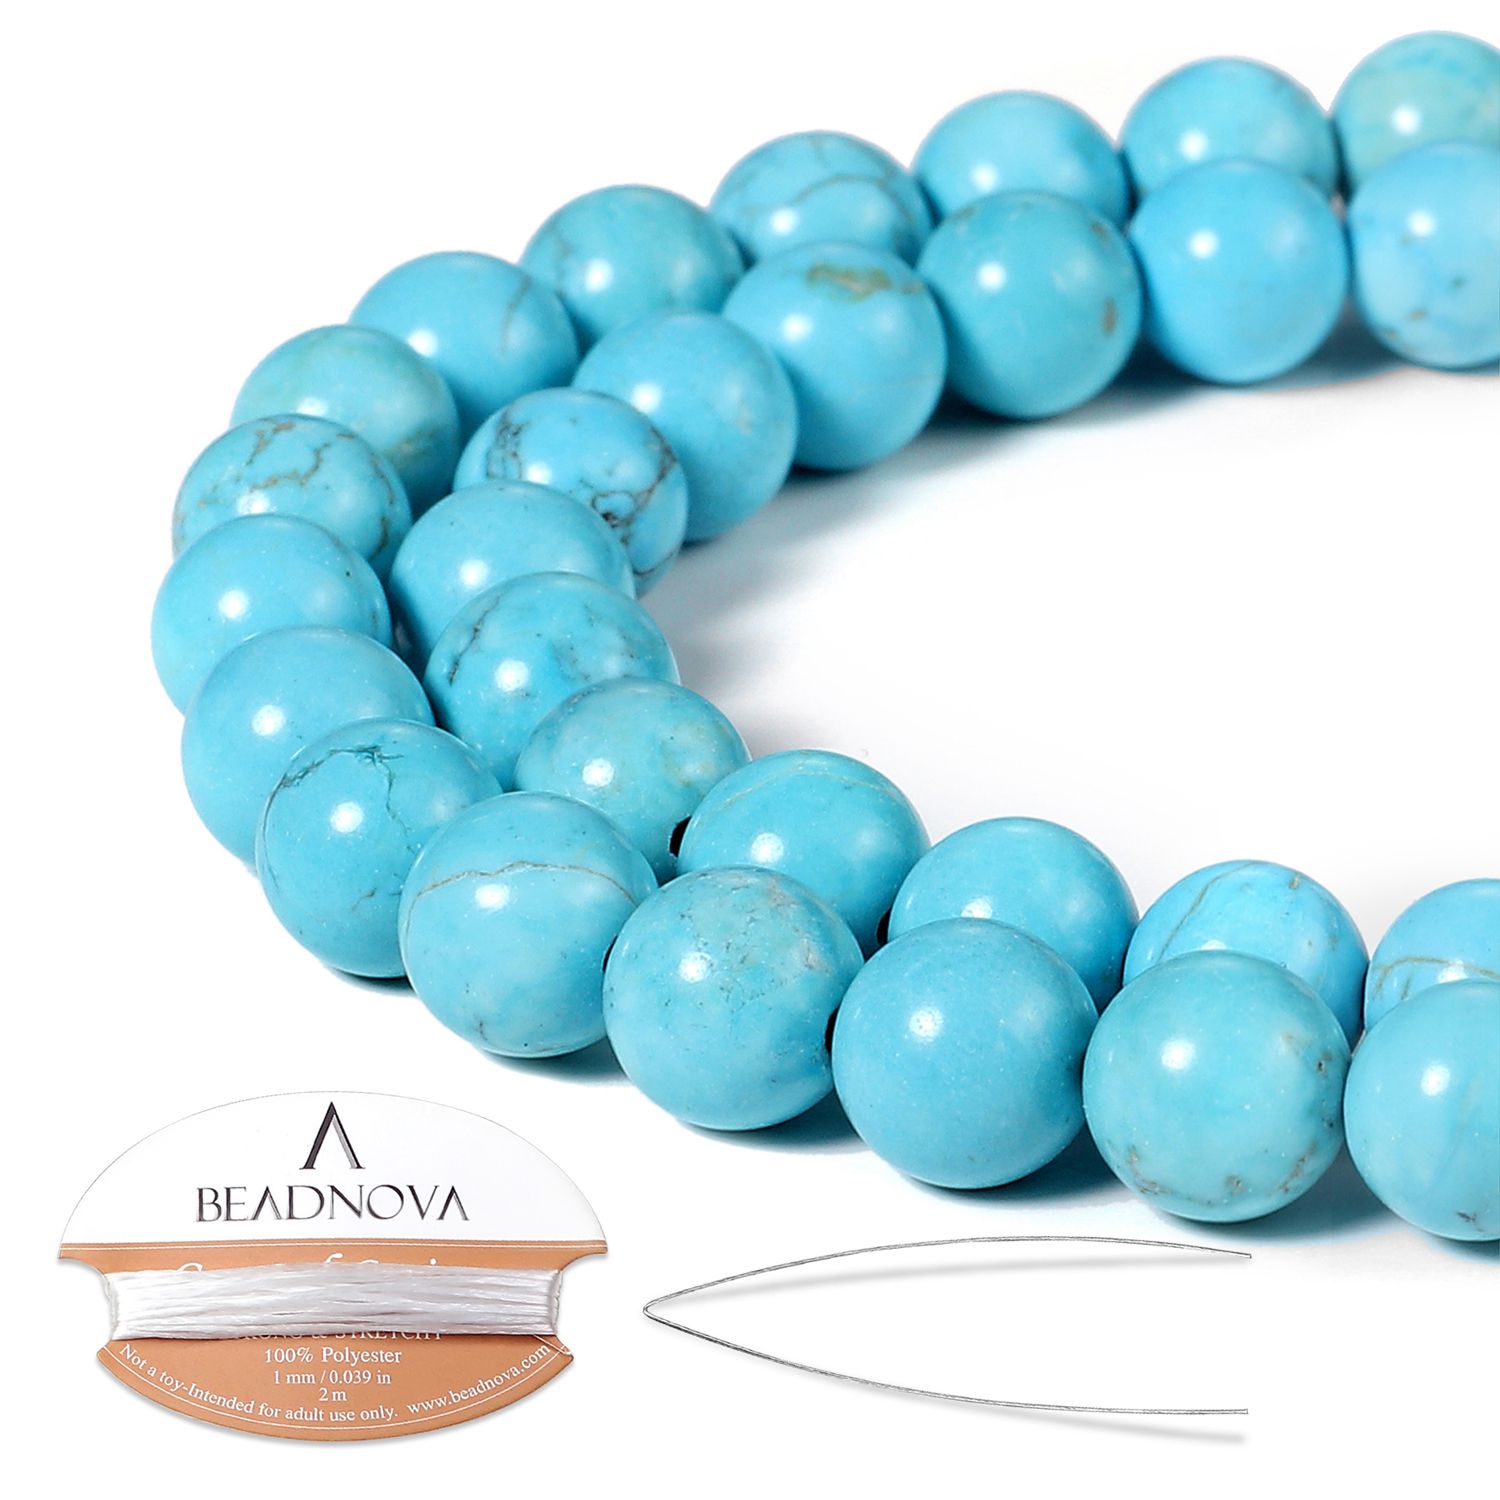  BEADNOVA 10mm Color Lava Beads Natural Crystal Beads Stone  Gemstone Round Loose Energy Healing Beads for Jewelry Making (10mm,  32-34pcs, Mix Color)